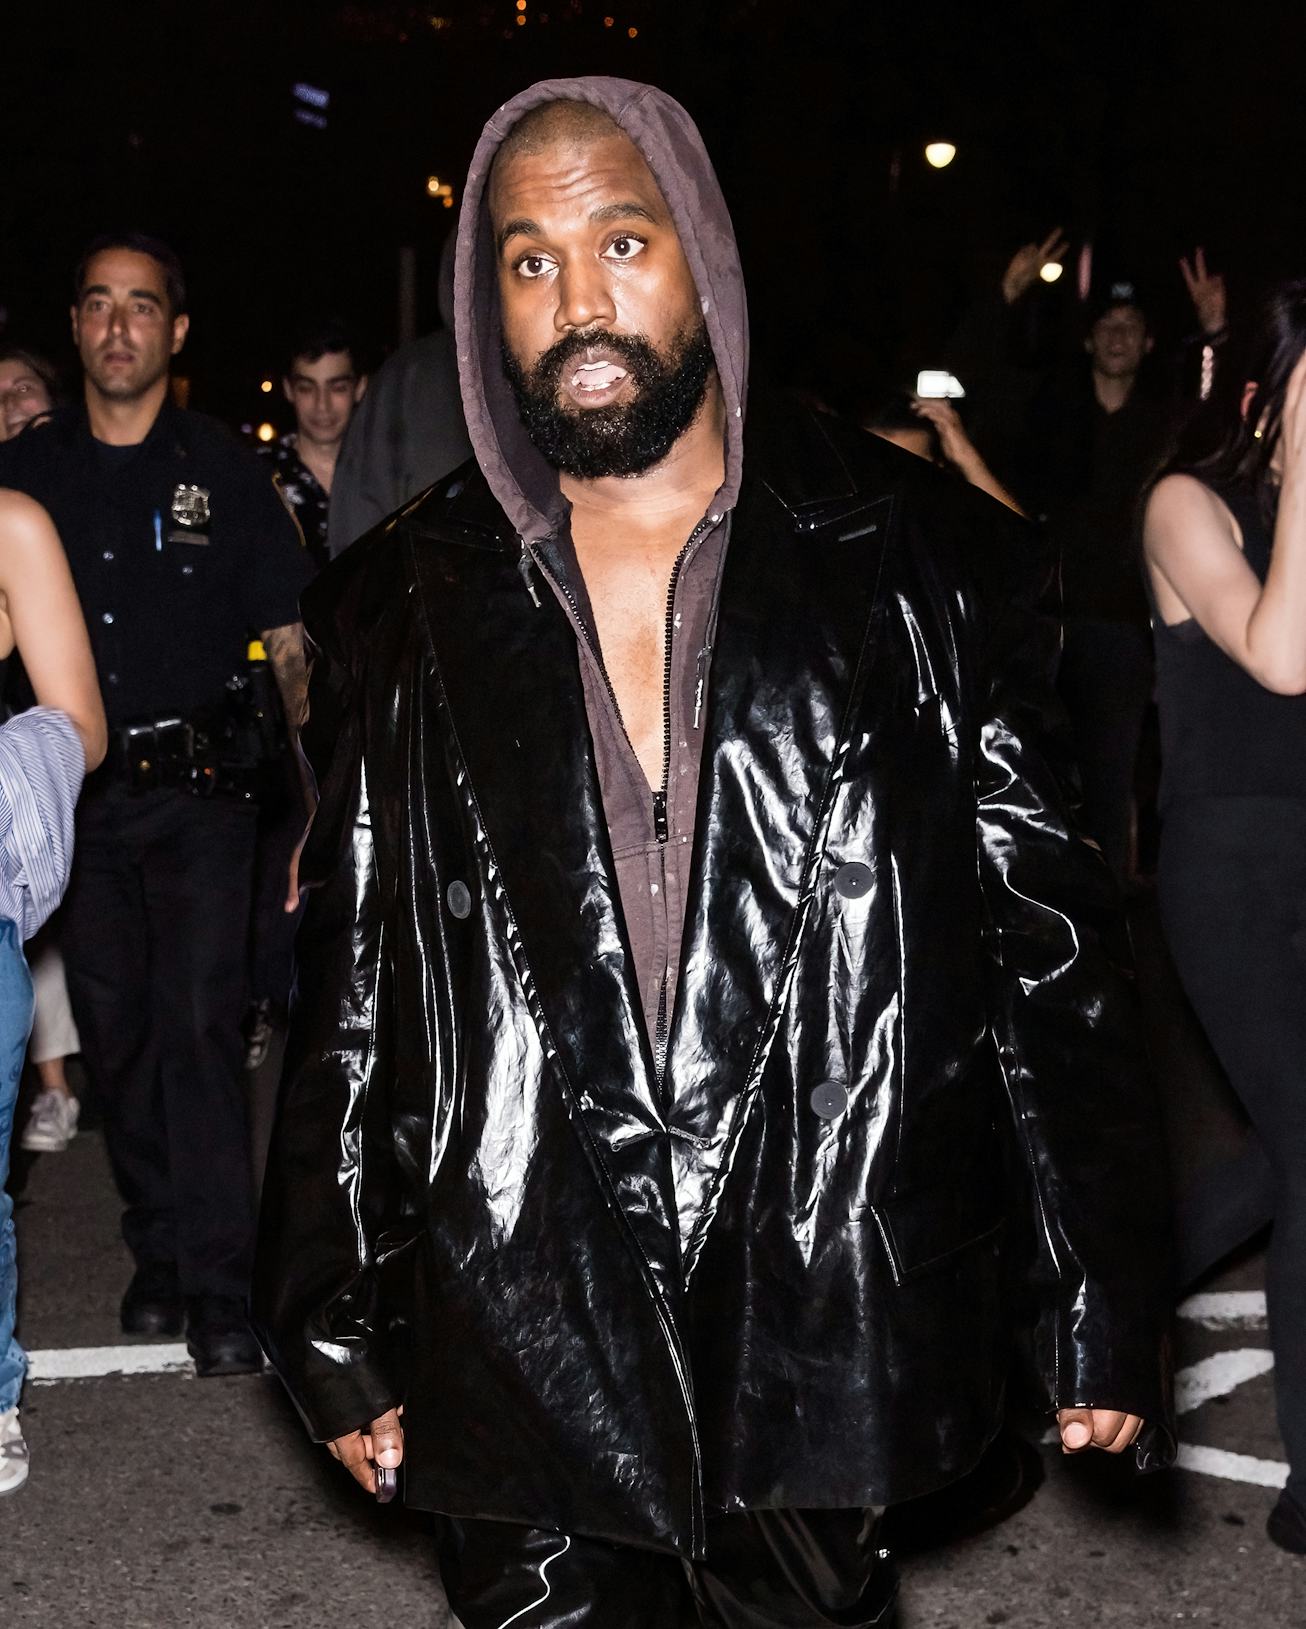 Kanye West is seen at New York Fashion Week. He terminated his partnership with Gap on Thursday.